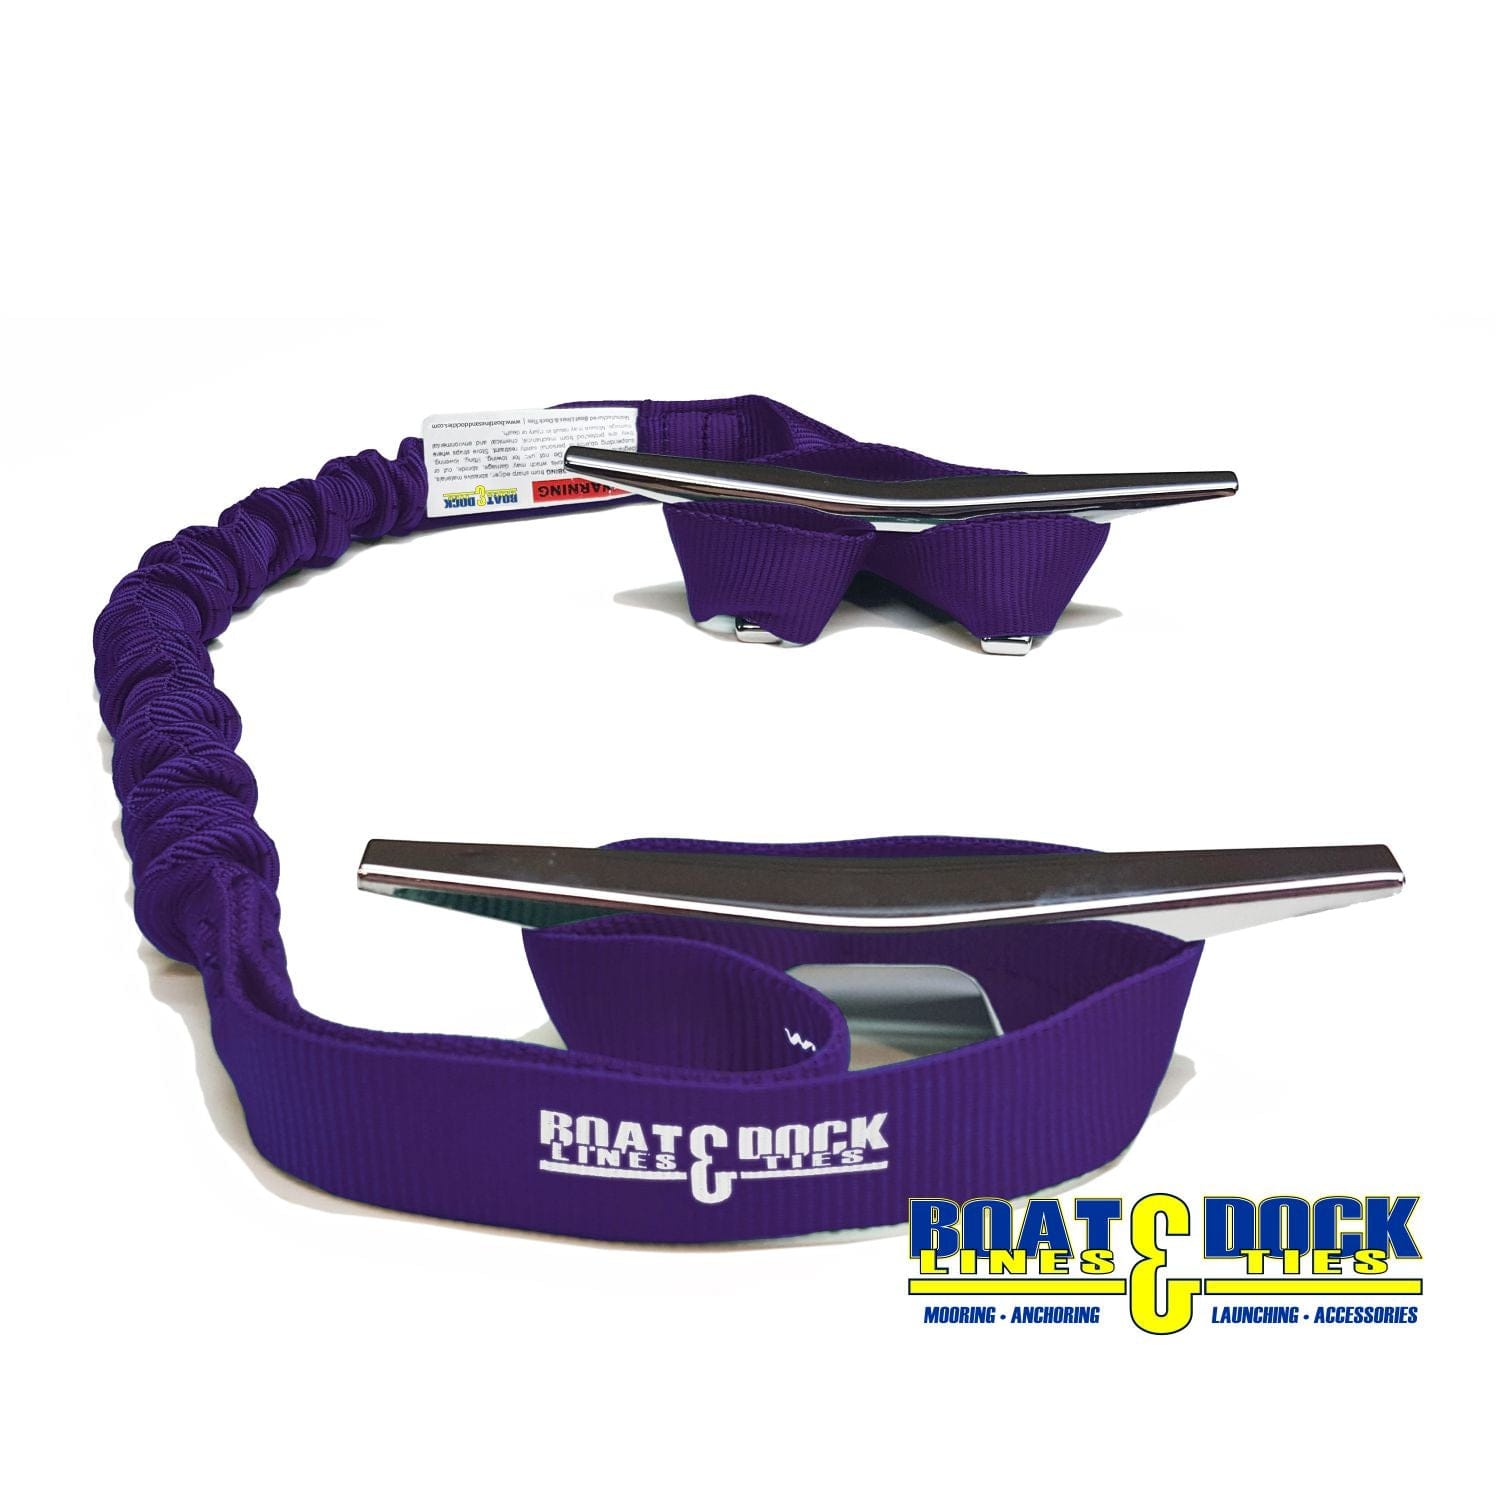 Bungee Dock Lines - 9-Inch Loop Ends, Made in USA, - Pack of 2 - Boat Lines & Dock Ties Boat Lines & Dock Ties Purple / 30 Inches